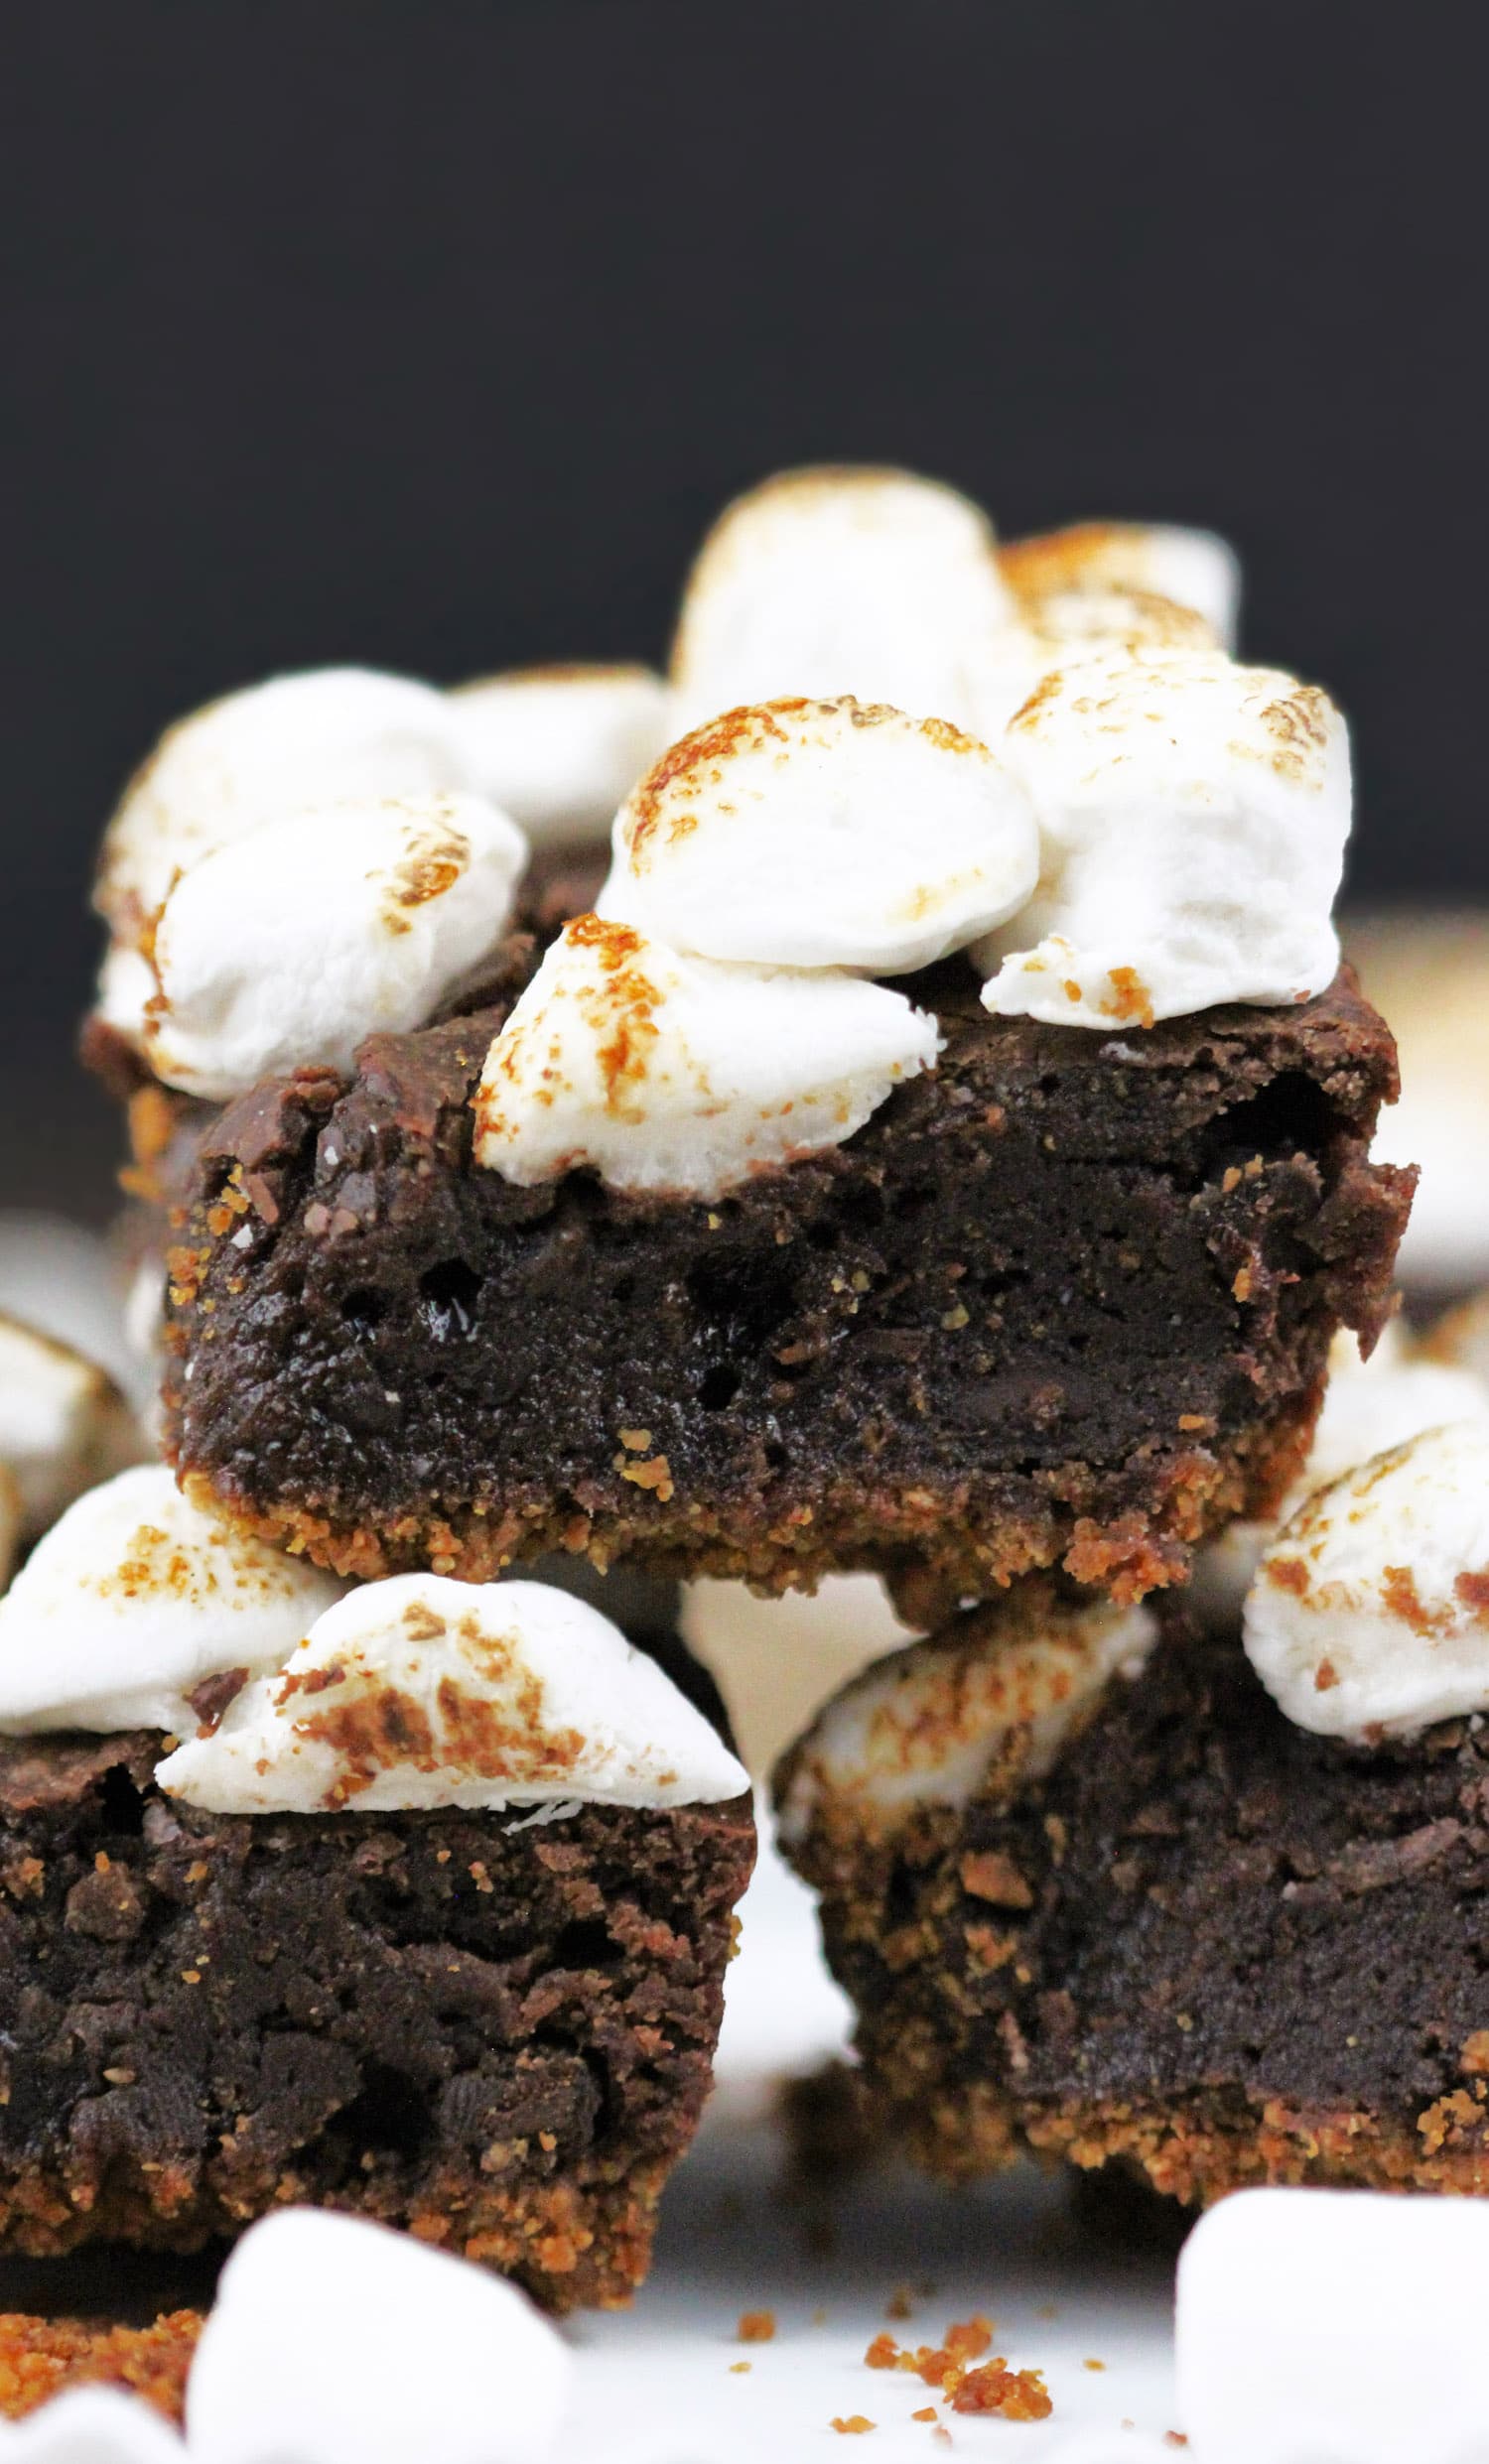 6-ingredient S’mores Brownies! Satisfy your s’mores craving with these delicious brownies. Made with an actual graham cracker crust, fudge brownie filling, and a sweet marshmallow studded topping, every bite is full of salty-sweet graham cracker flavor, decadent chocolate, and toasted mallows. Healthy Dessert Recipes at the Desserts With Benefits Blog (www.DessertsWithBenefits.com)